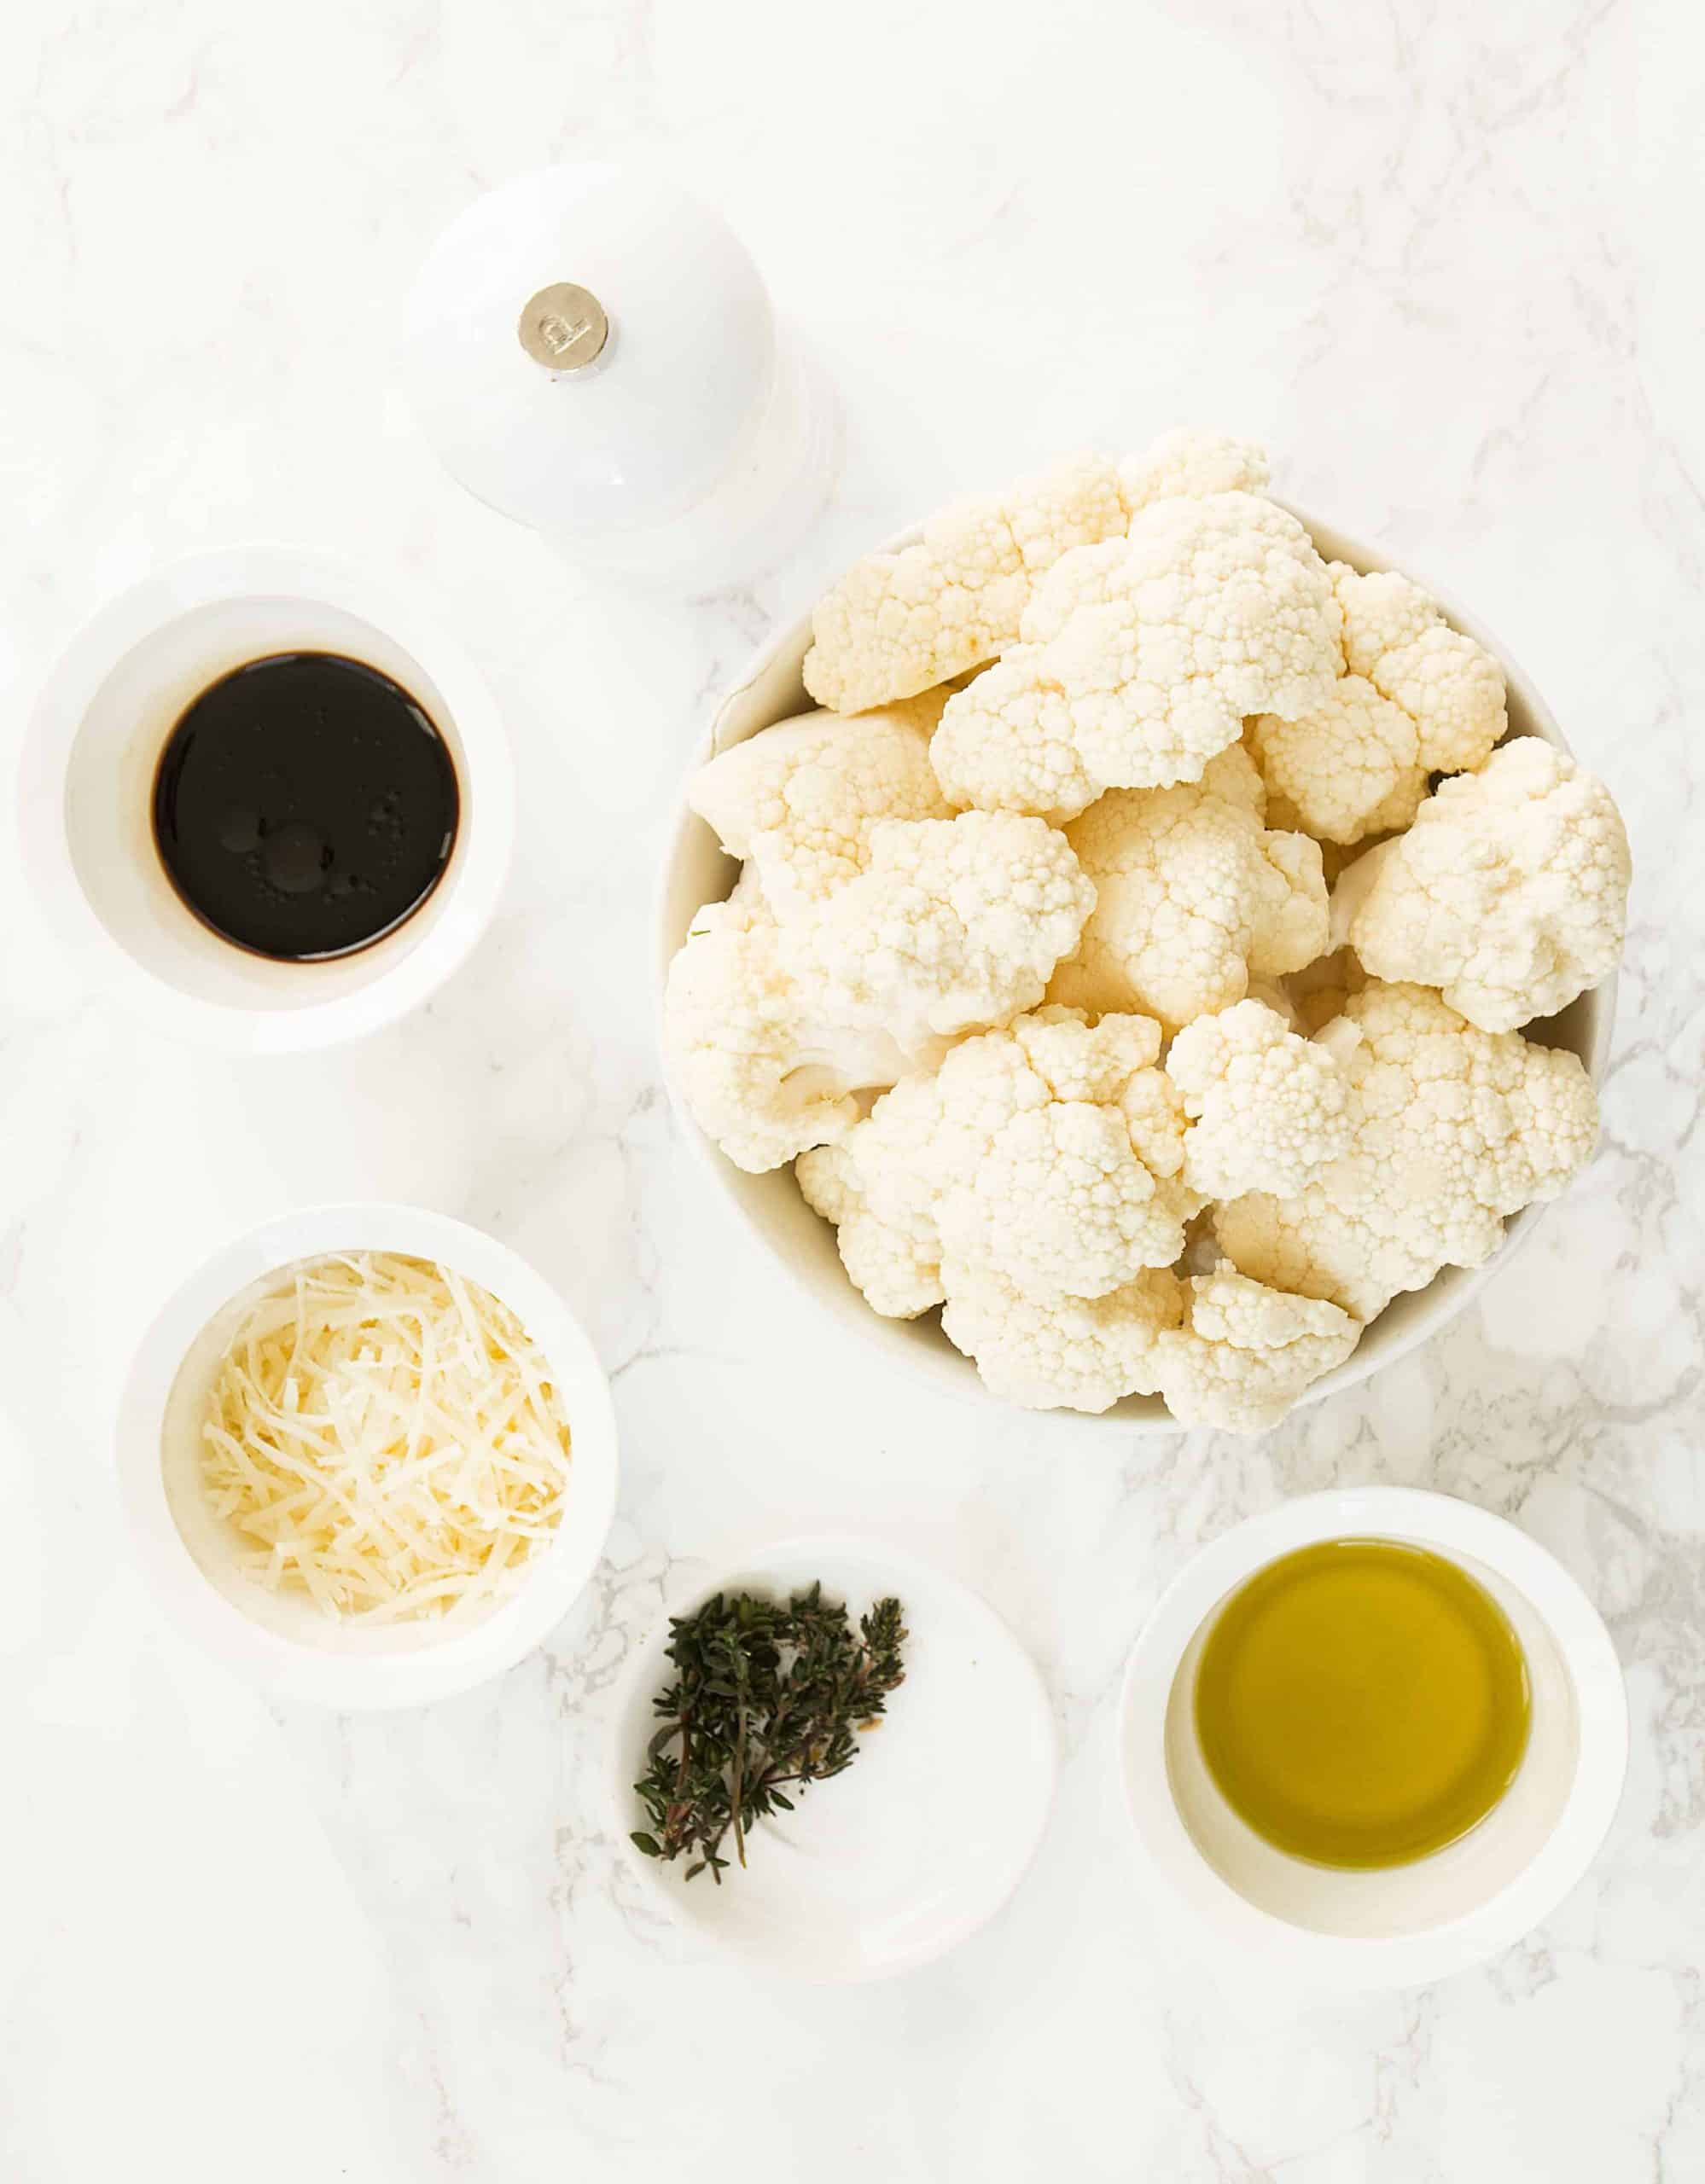 The ingredients for the roasted balsamic cauliflower are arranged over a white background.